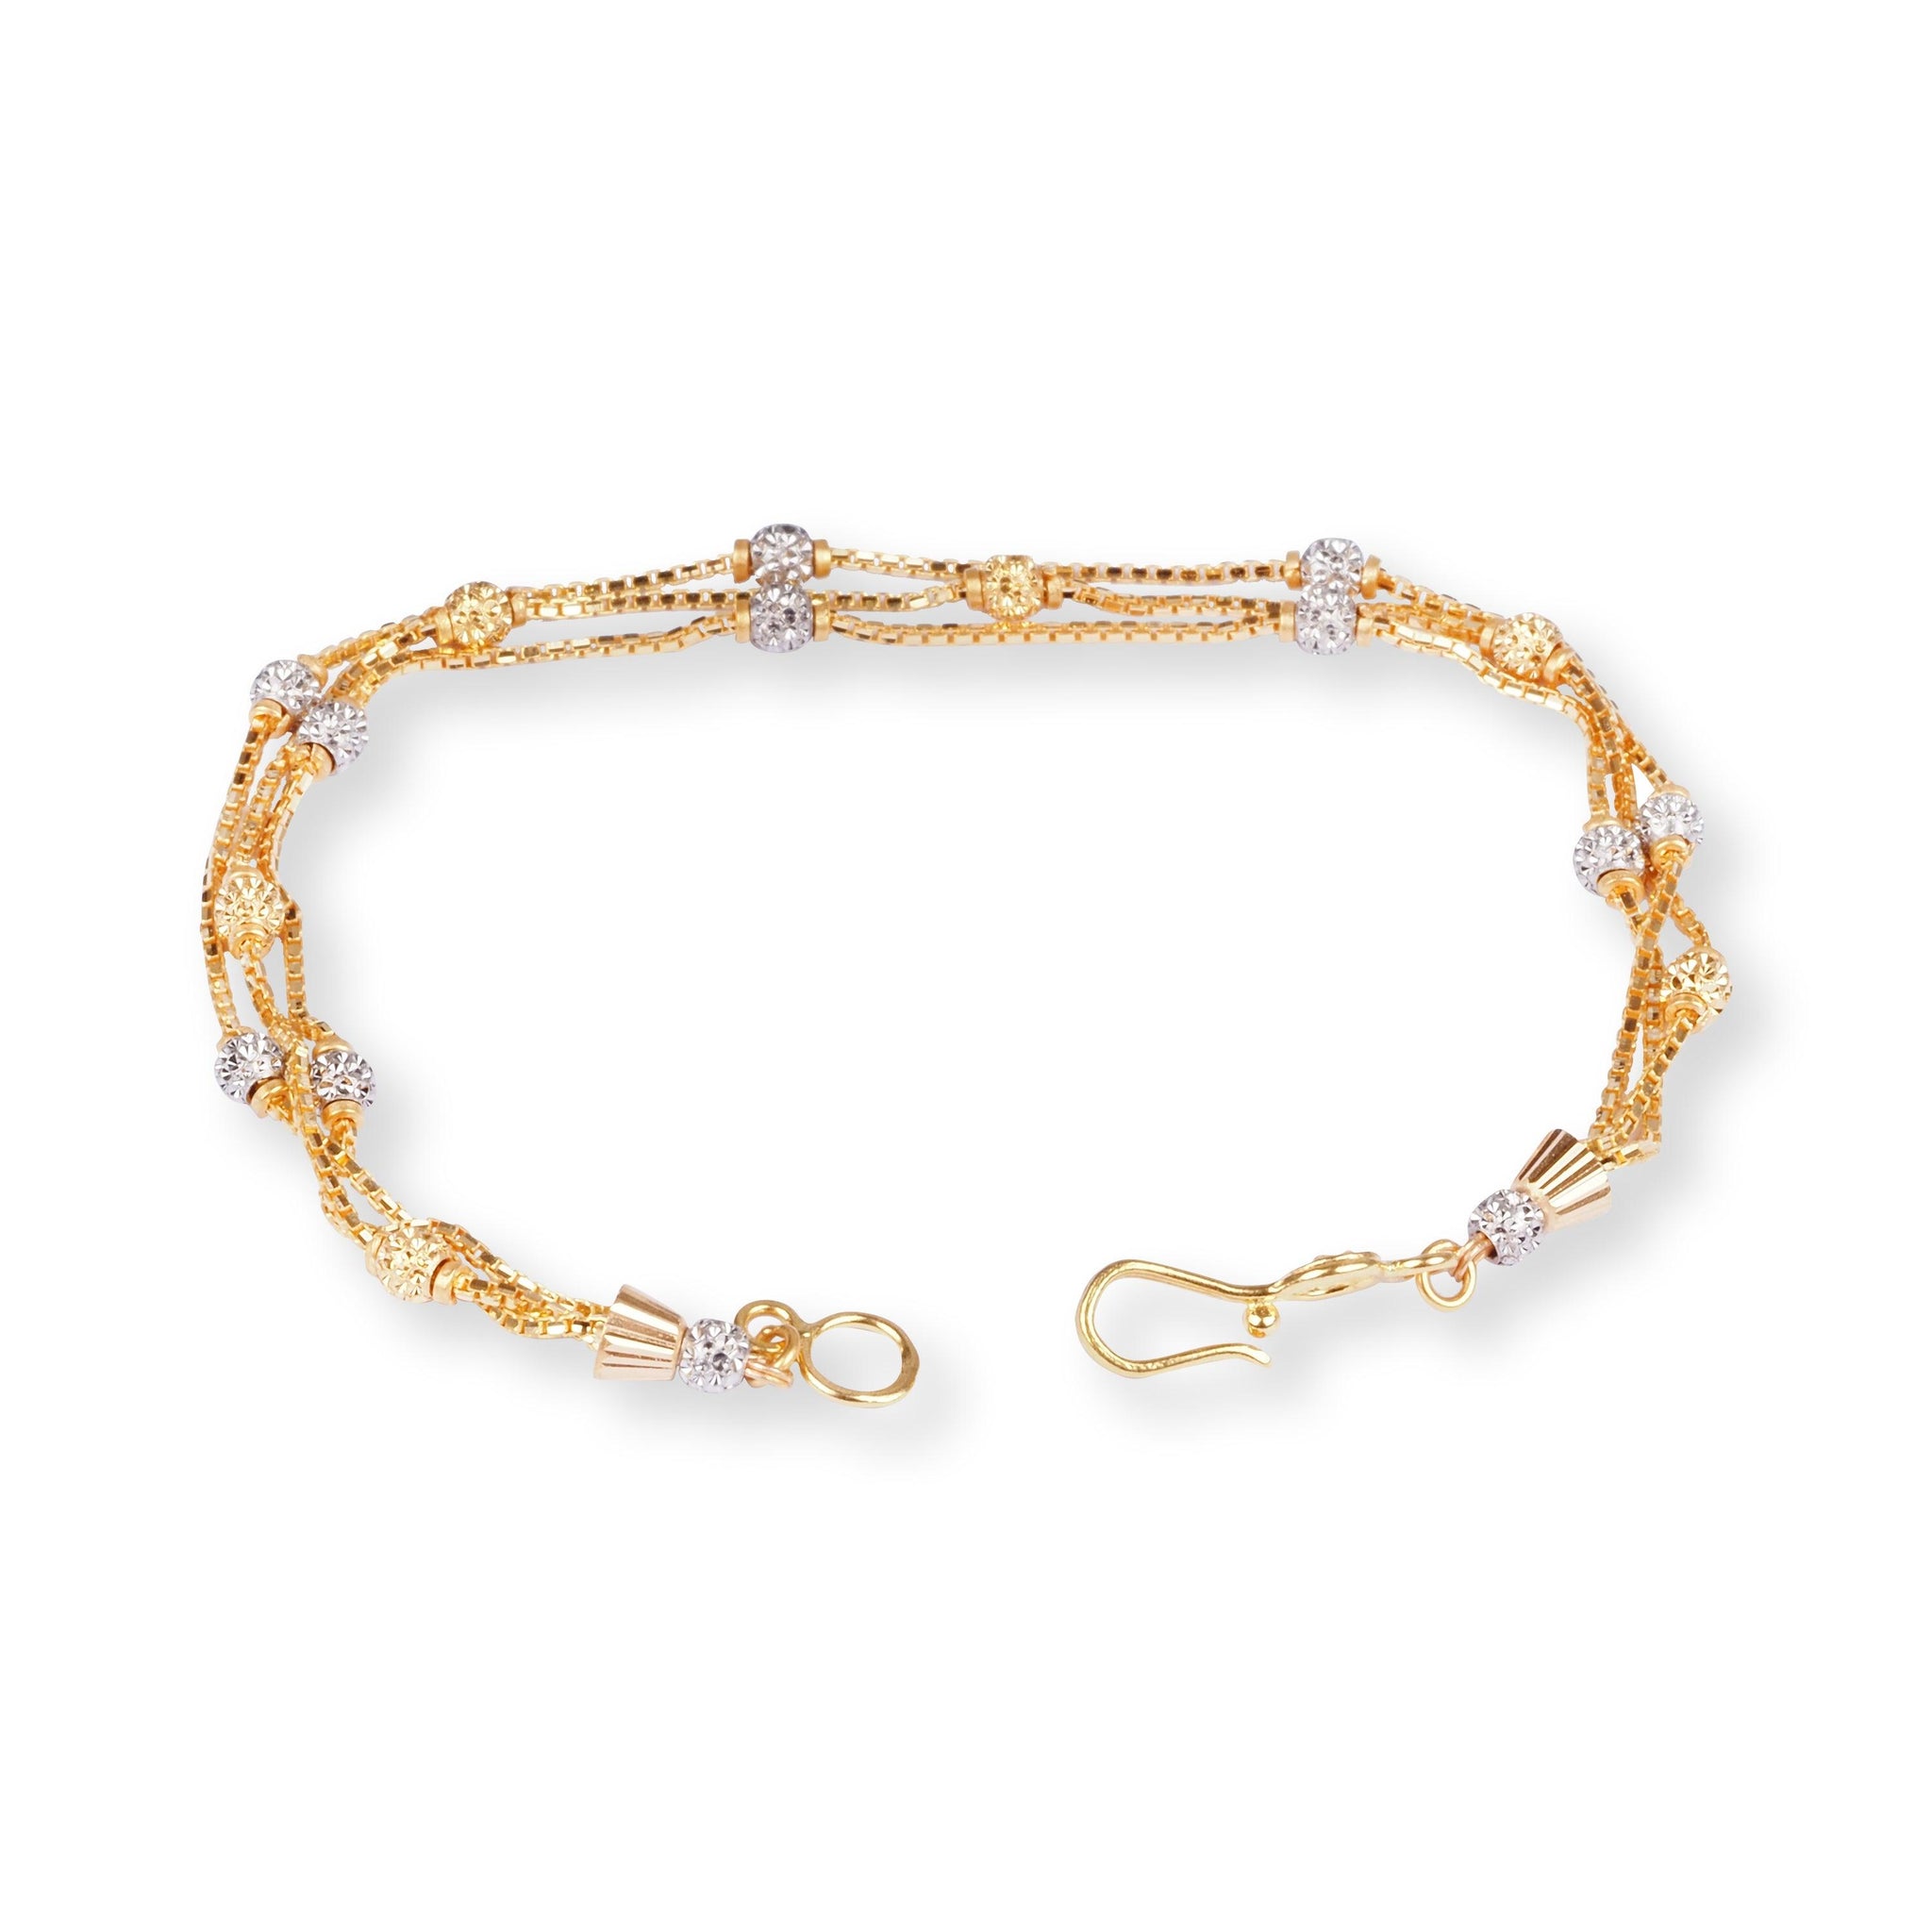 22ct Gold Three Row Bracelet with Plain and Rhodium Diamond Cut Beads and Hook Clasp LBR-8501